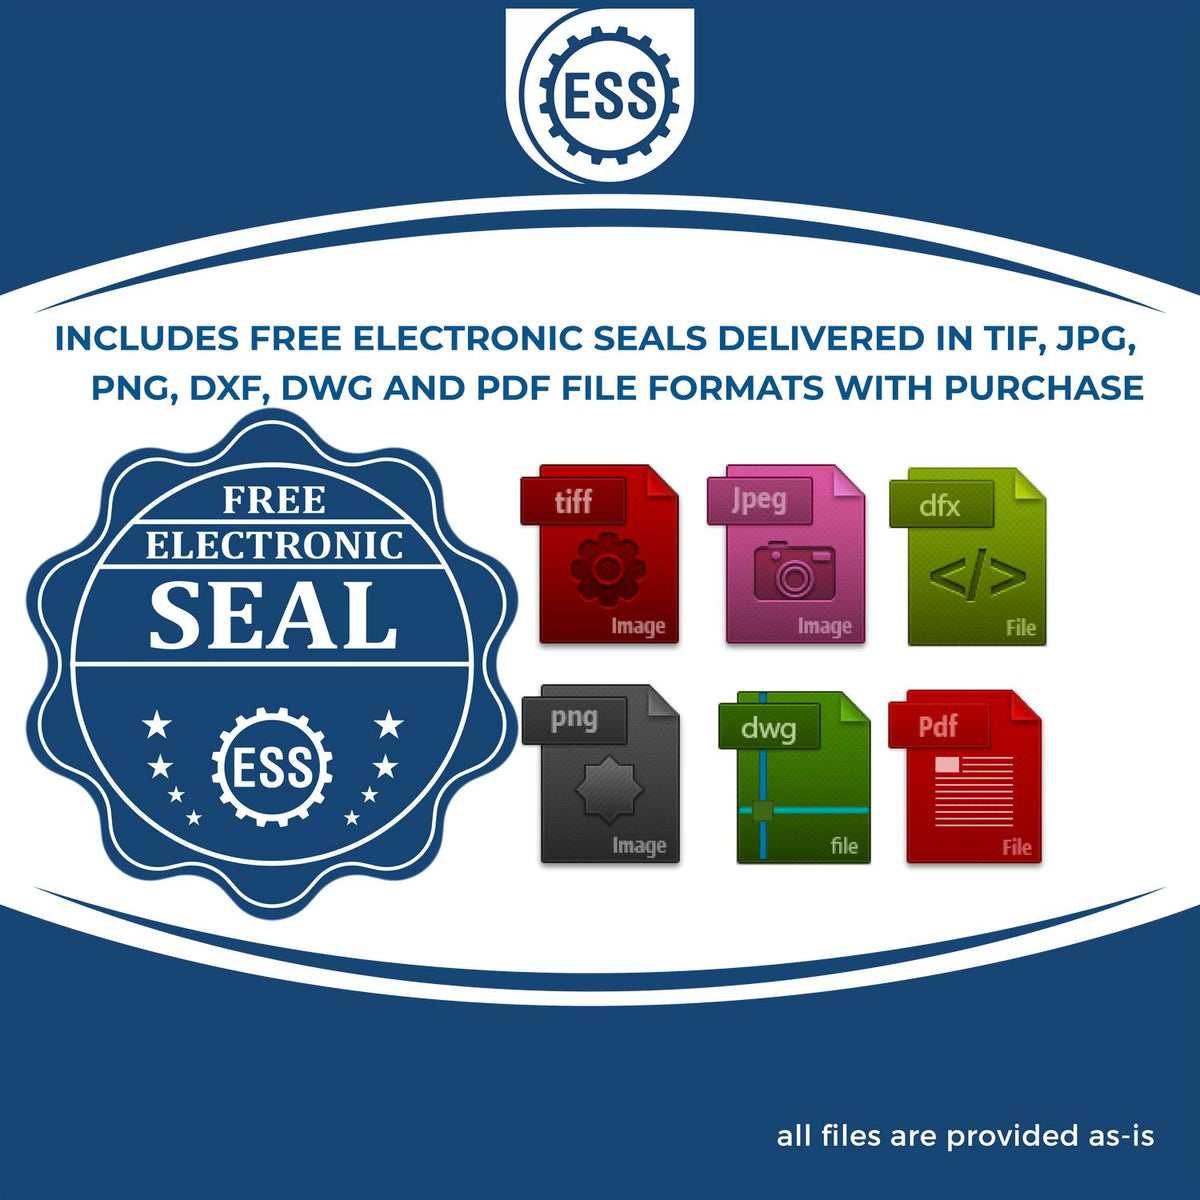 An infographic for the free electronic seal for the Handheld Mississippi Land Surveyor Seal illustrating the different file type icons such as DXF, DWG, TIF, JPG and PNG.